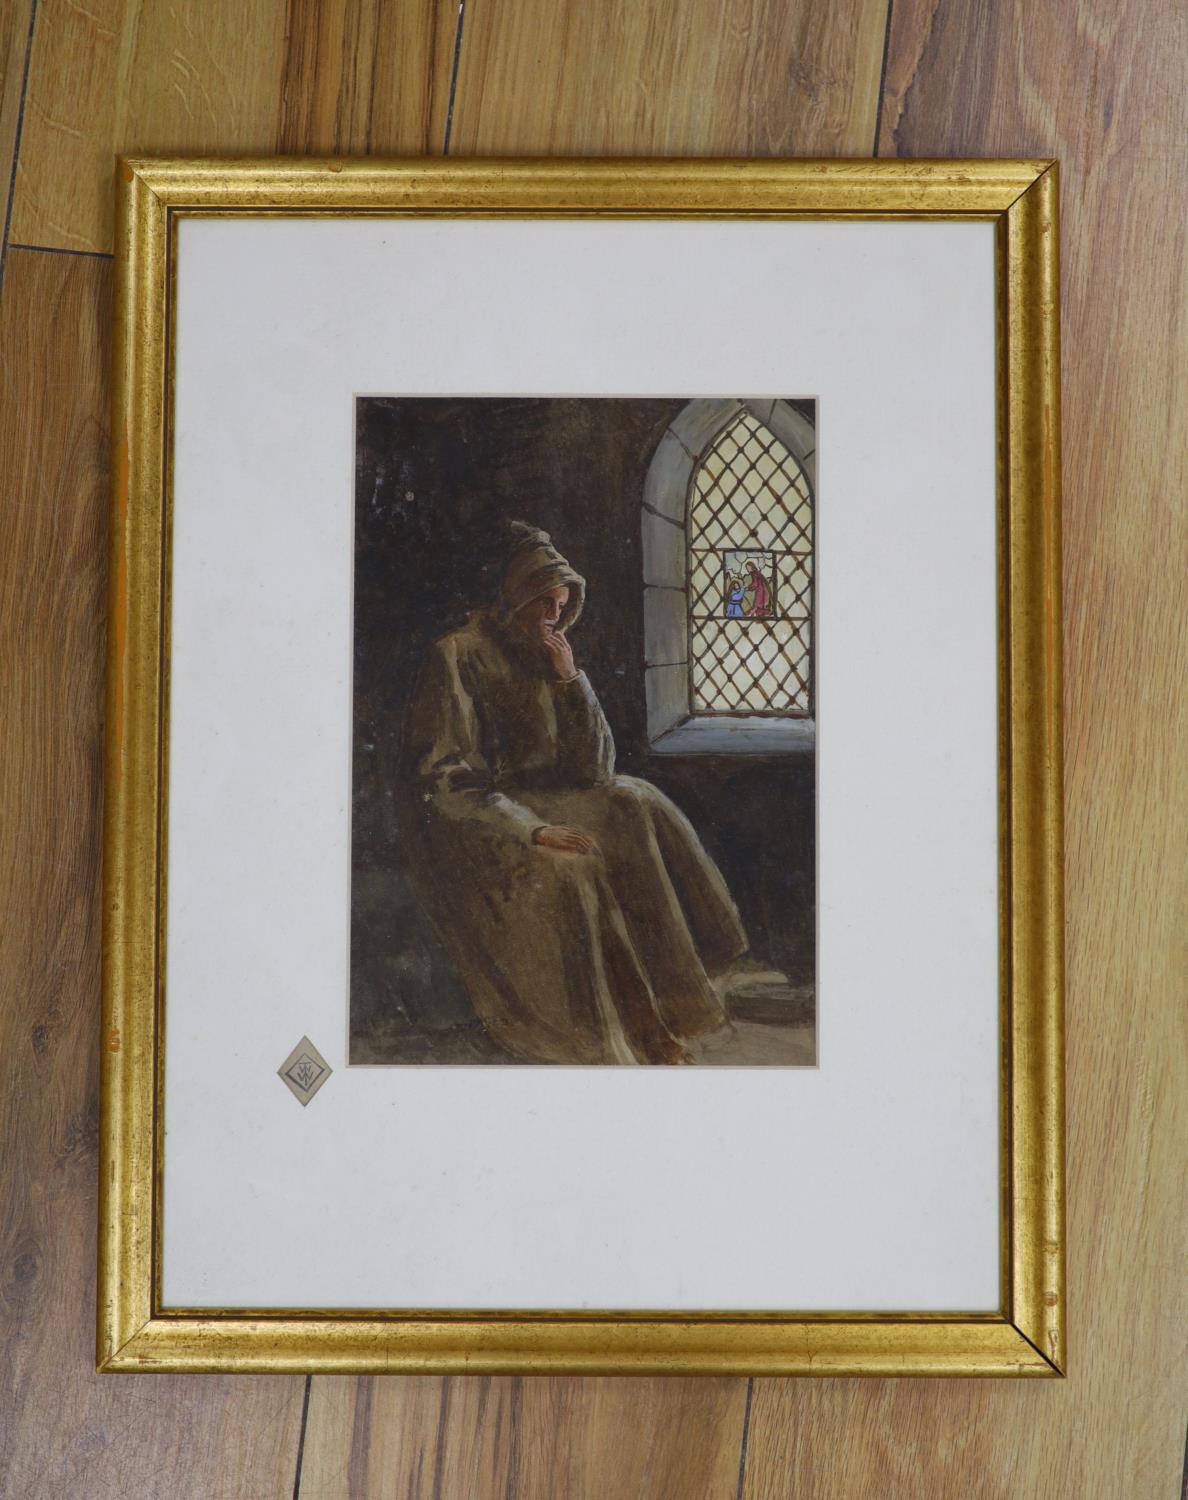 William Tatton Winter (1855-1928), watercolour, Monk seated beside a window, monogrammed, 24 x 17cm - Image 2 of 2